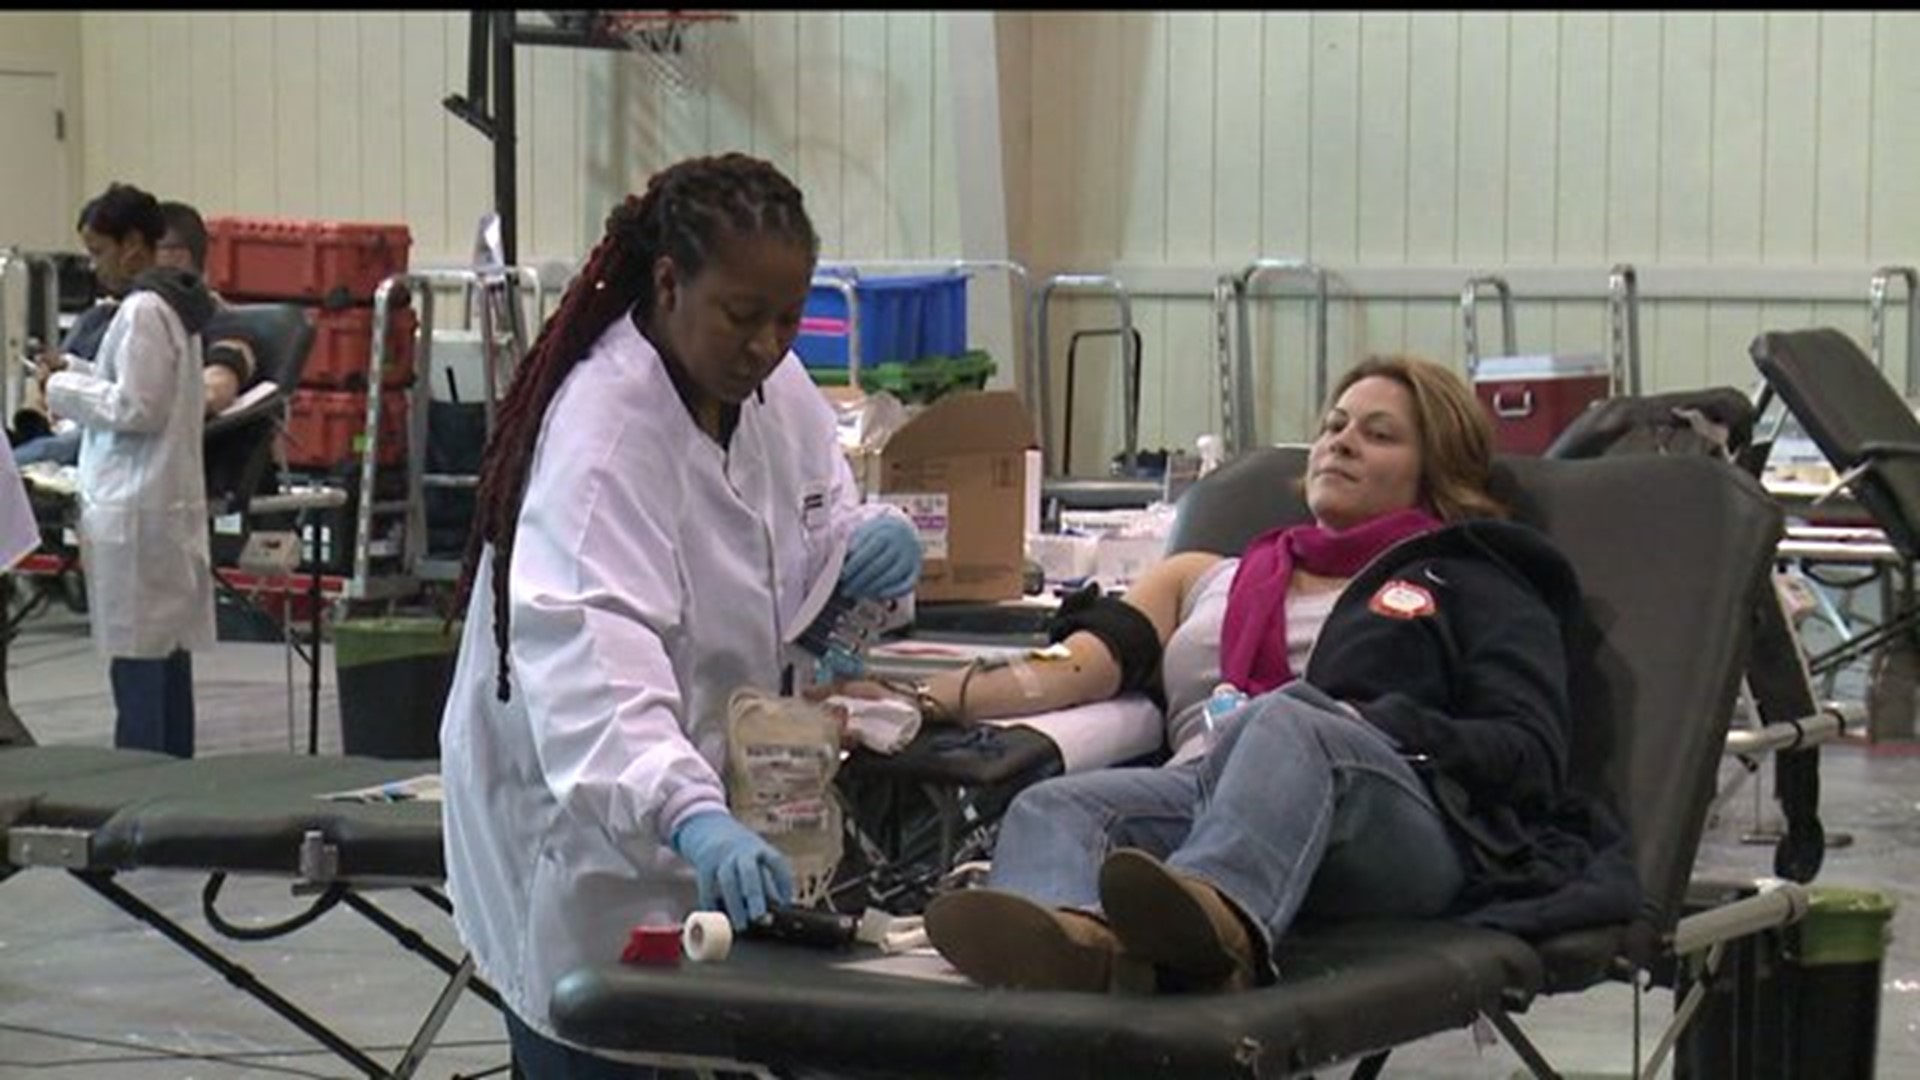 Honoring firefighters with a special Red Cross blood drive